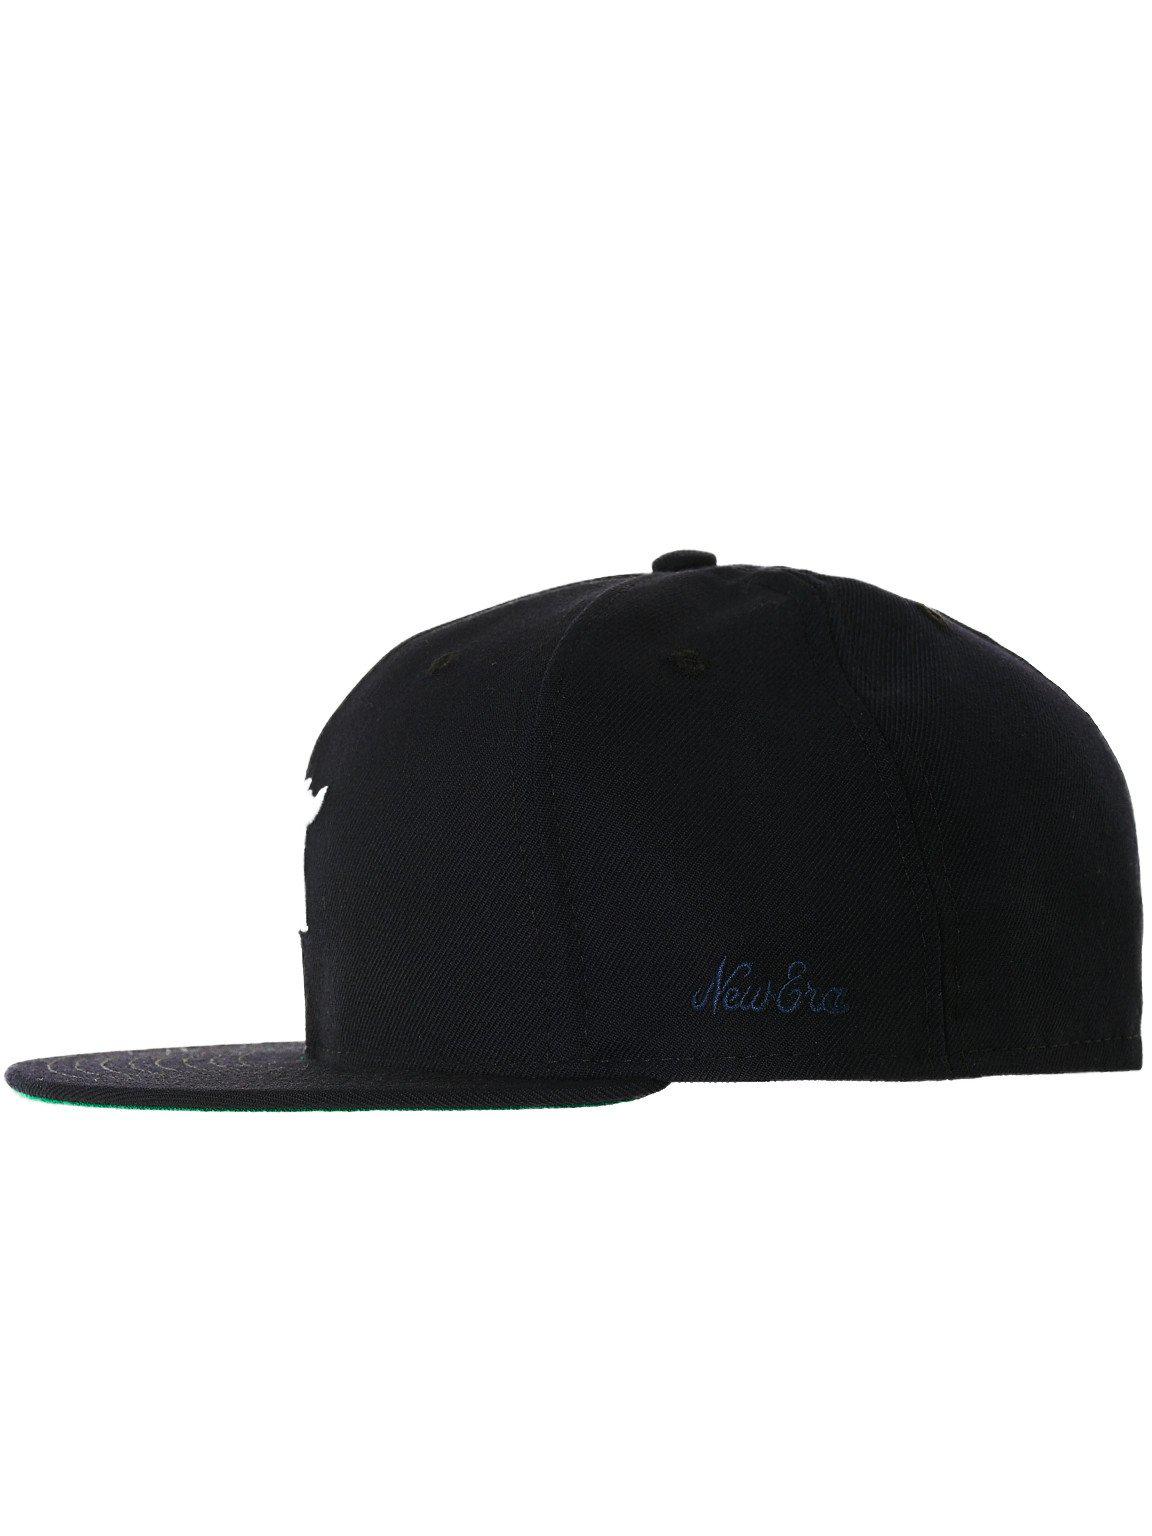 Fear Of God Wool New Era X Fitted Cap in Blue for Men - Lyst